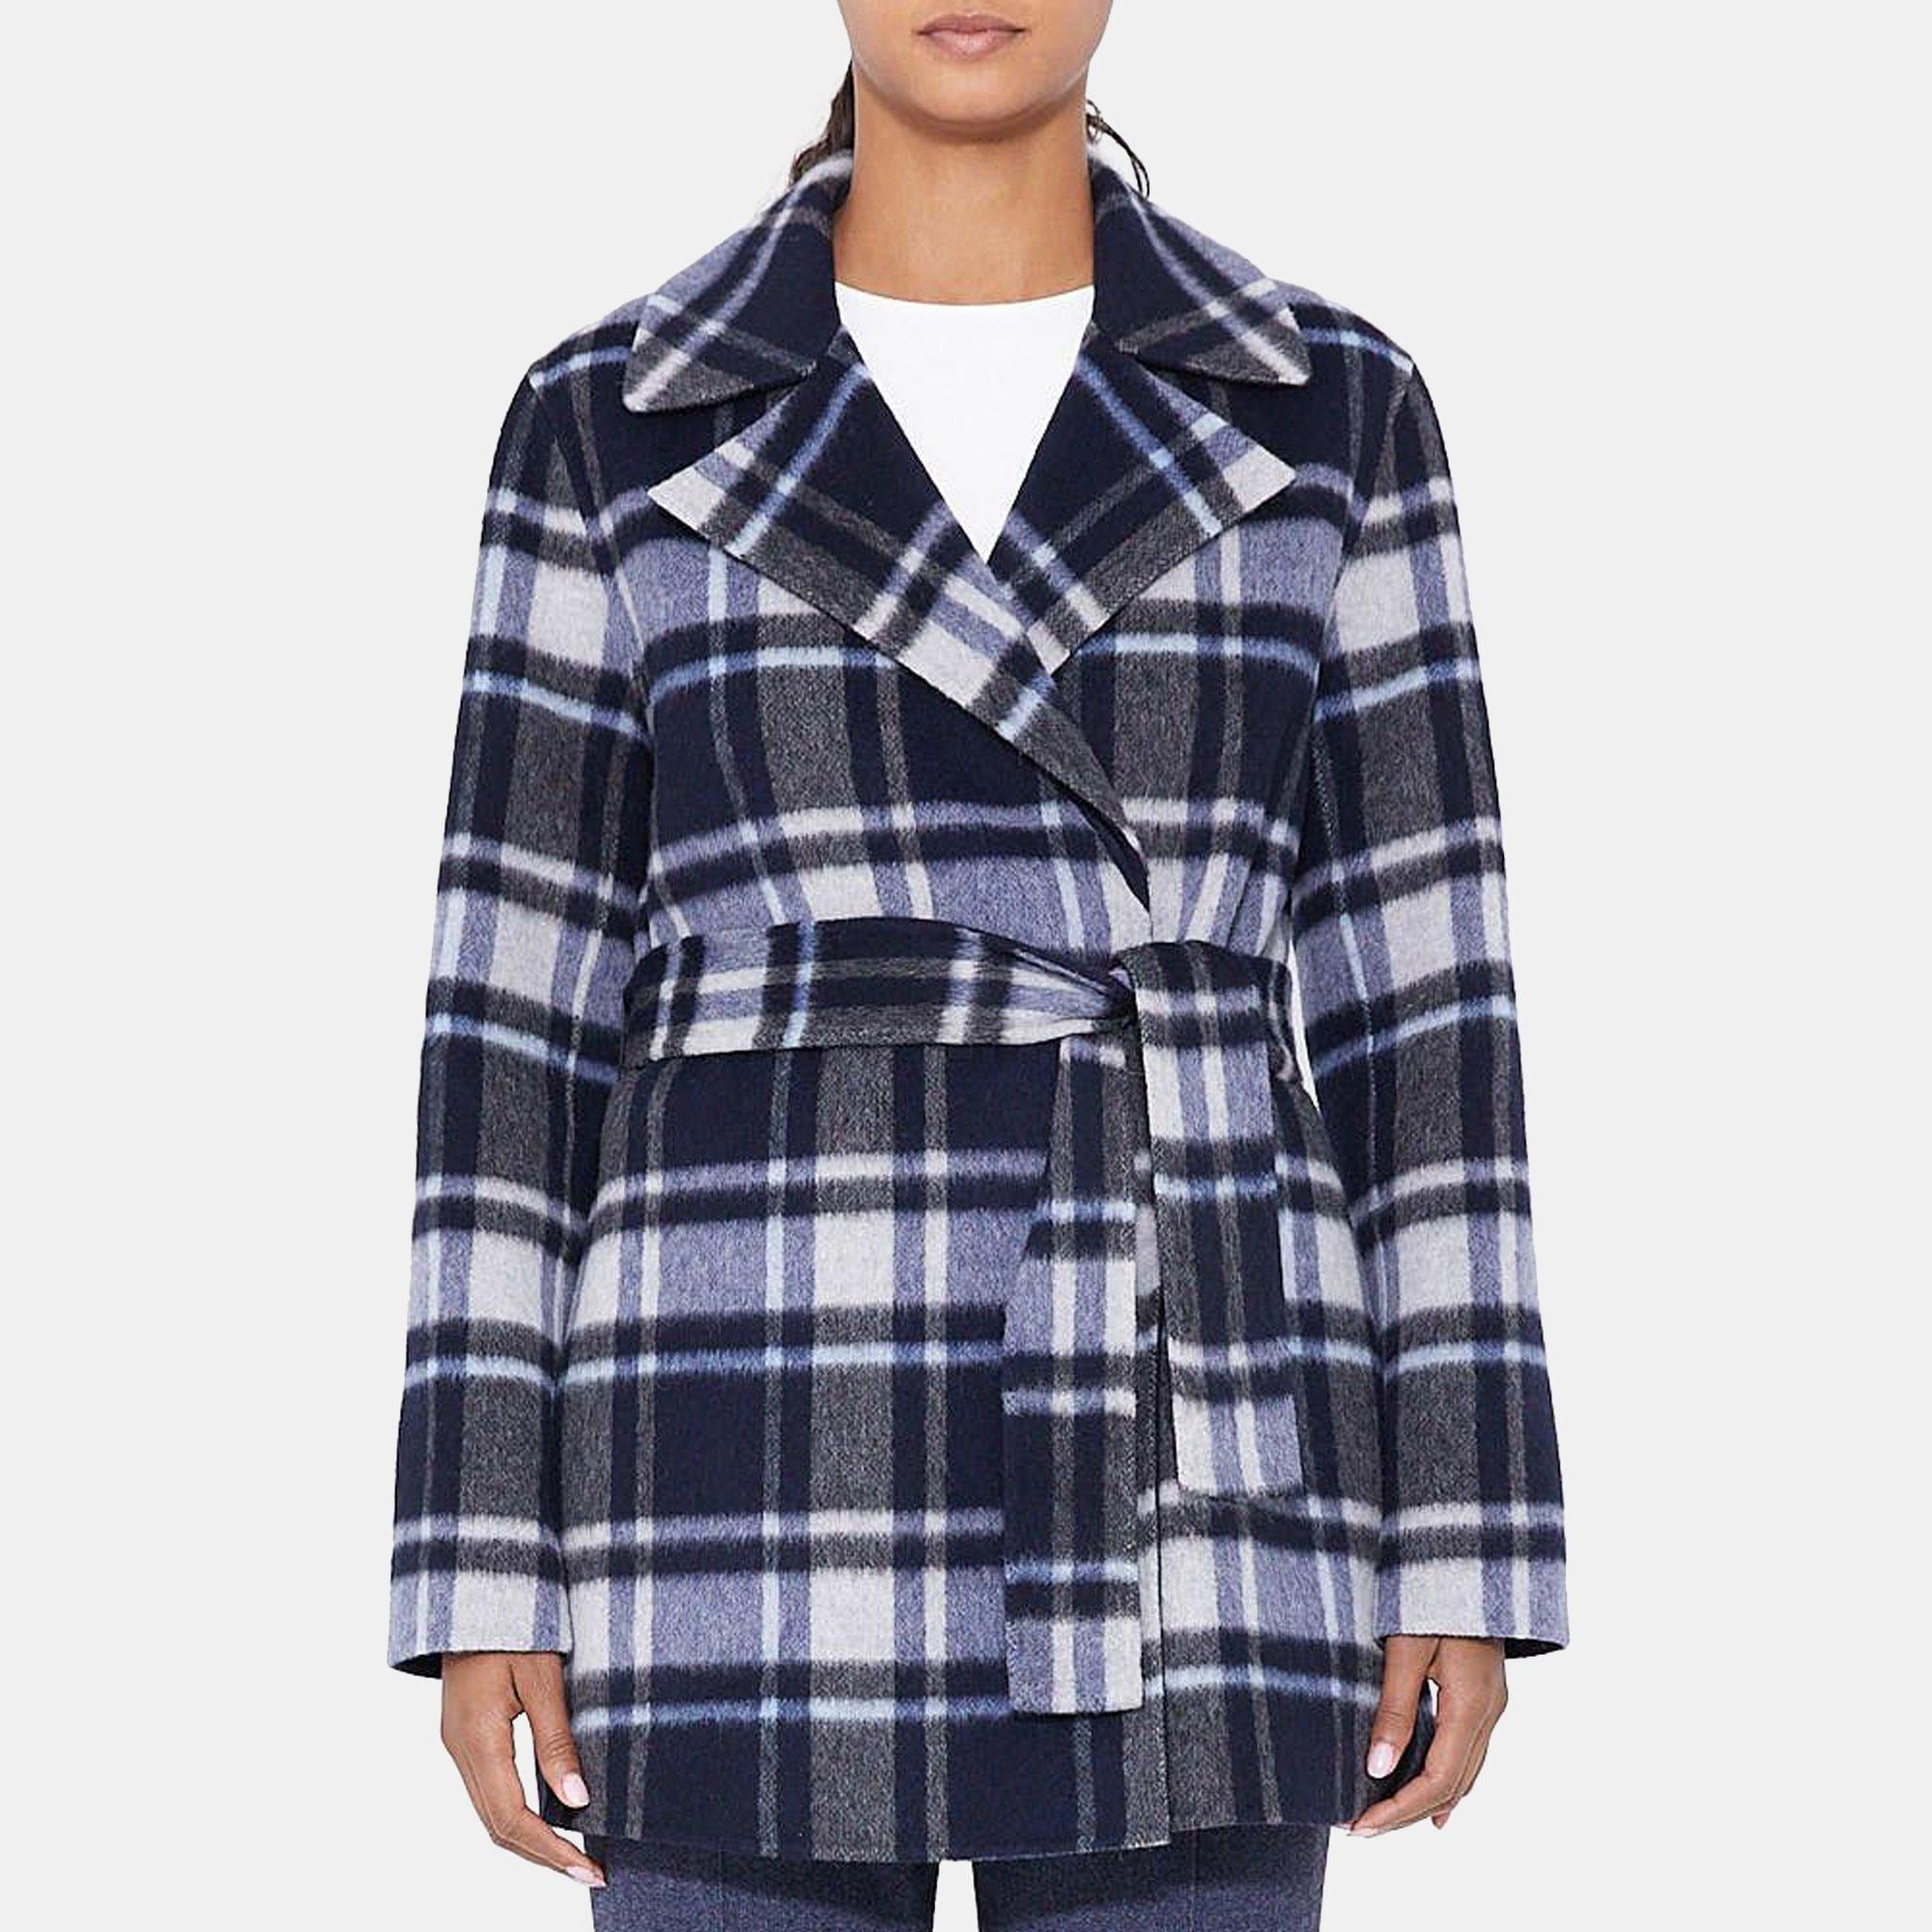 Women's Outerwear | Theory Outlet